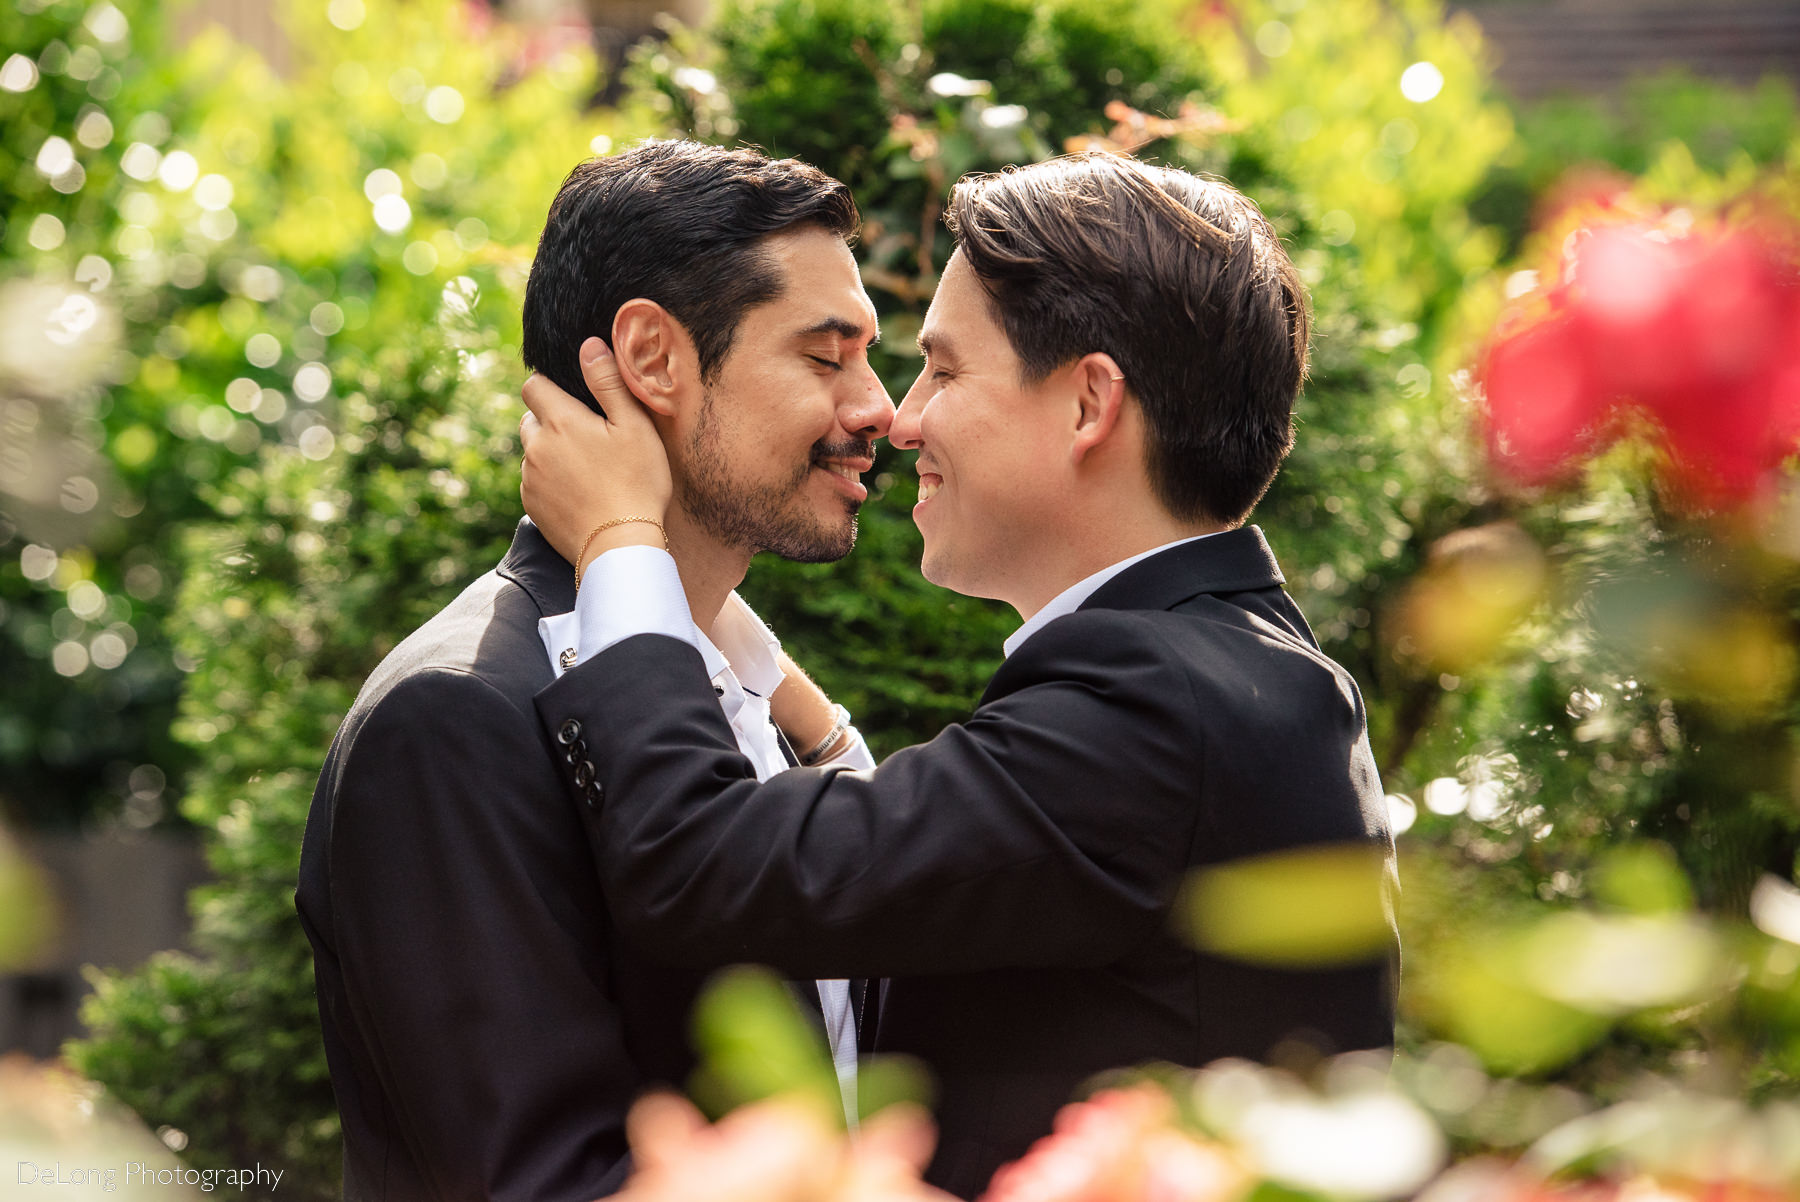 Portrait with bokeh leaves and flowers in the foreground of two grooms gently giving eskimo kisses in the gardens of the Duke Mansion by Charlotte wedding photographers DeLong Photography